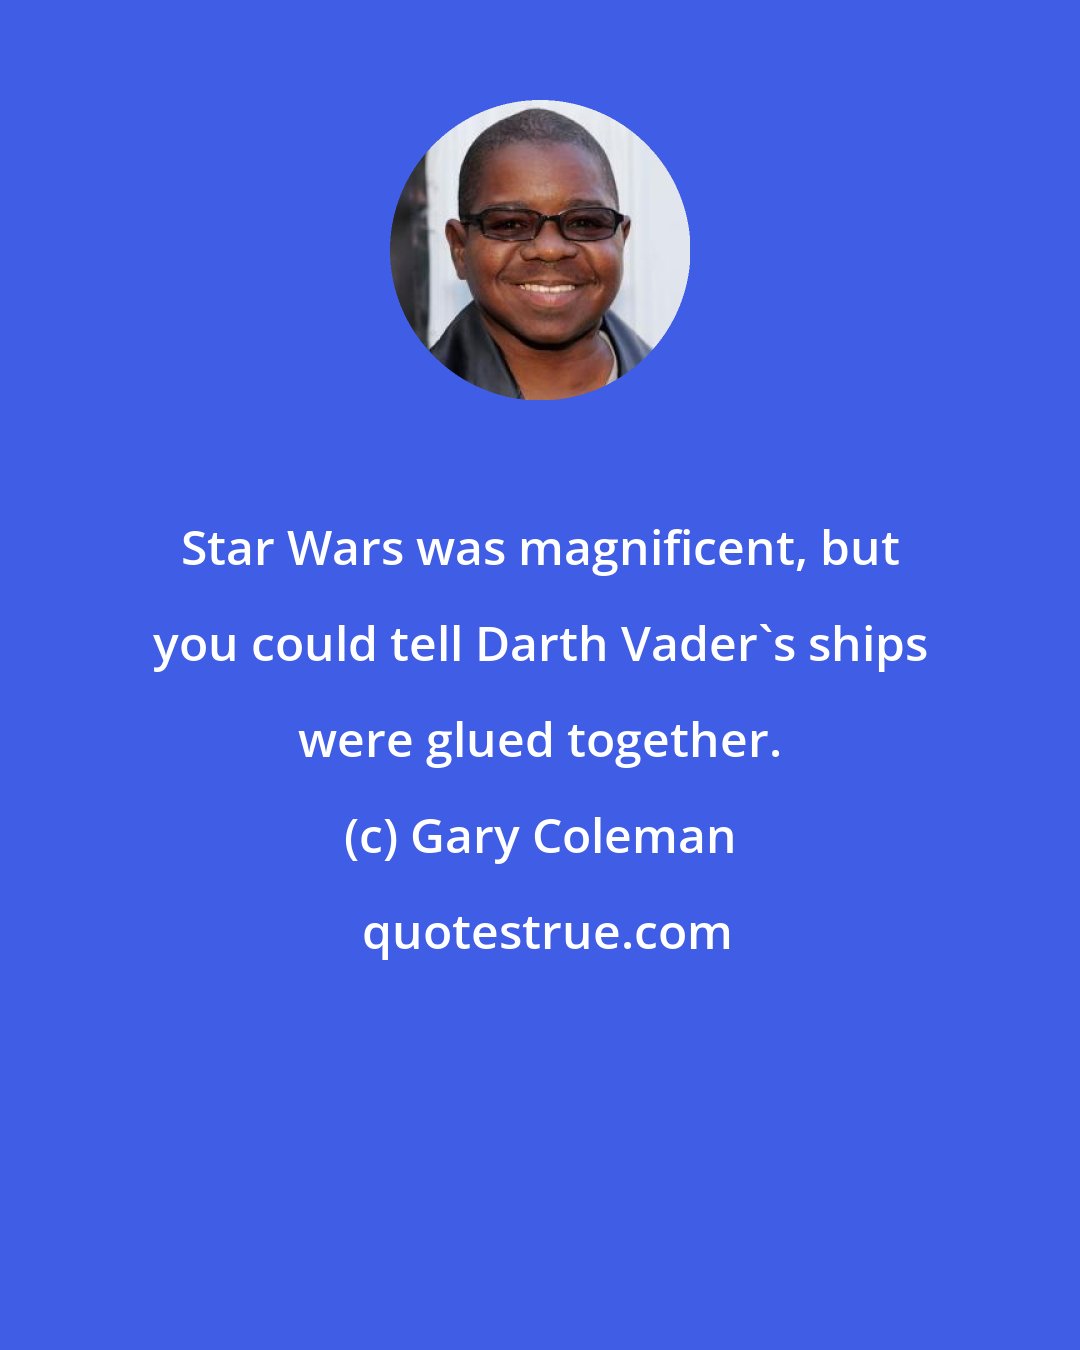 Gary Coleman: Star Wars was magnificent, but you could tell Darth Vader's ships were glued together.